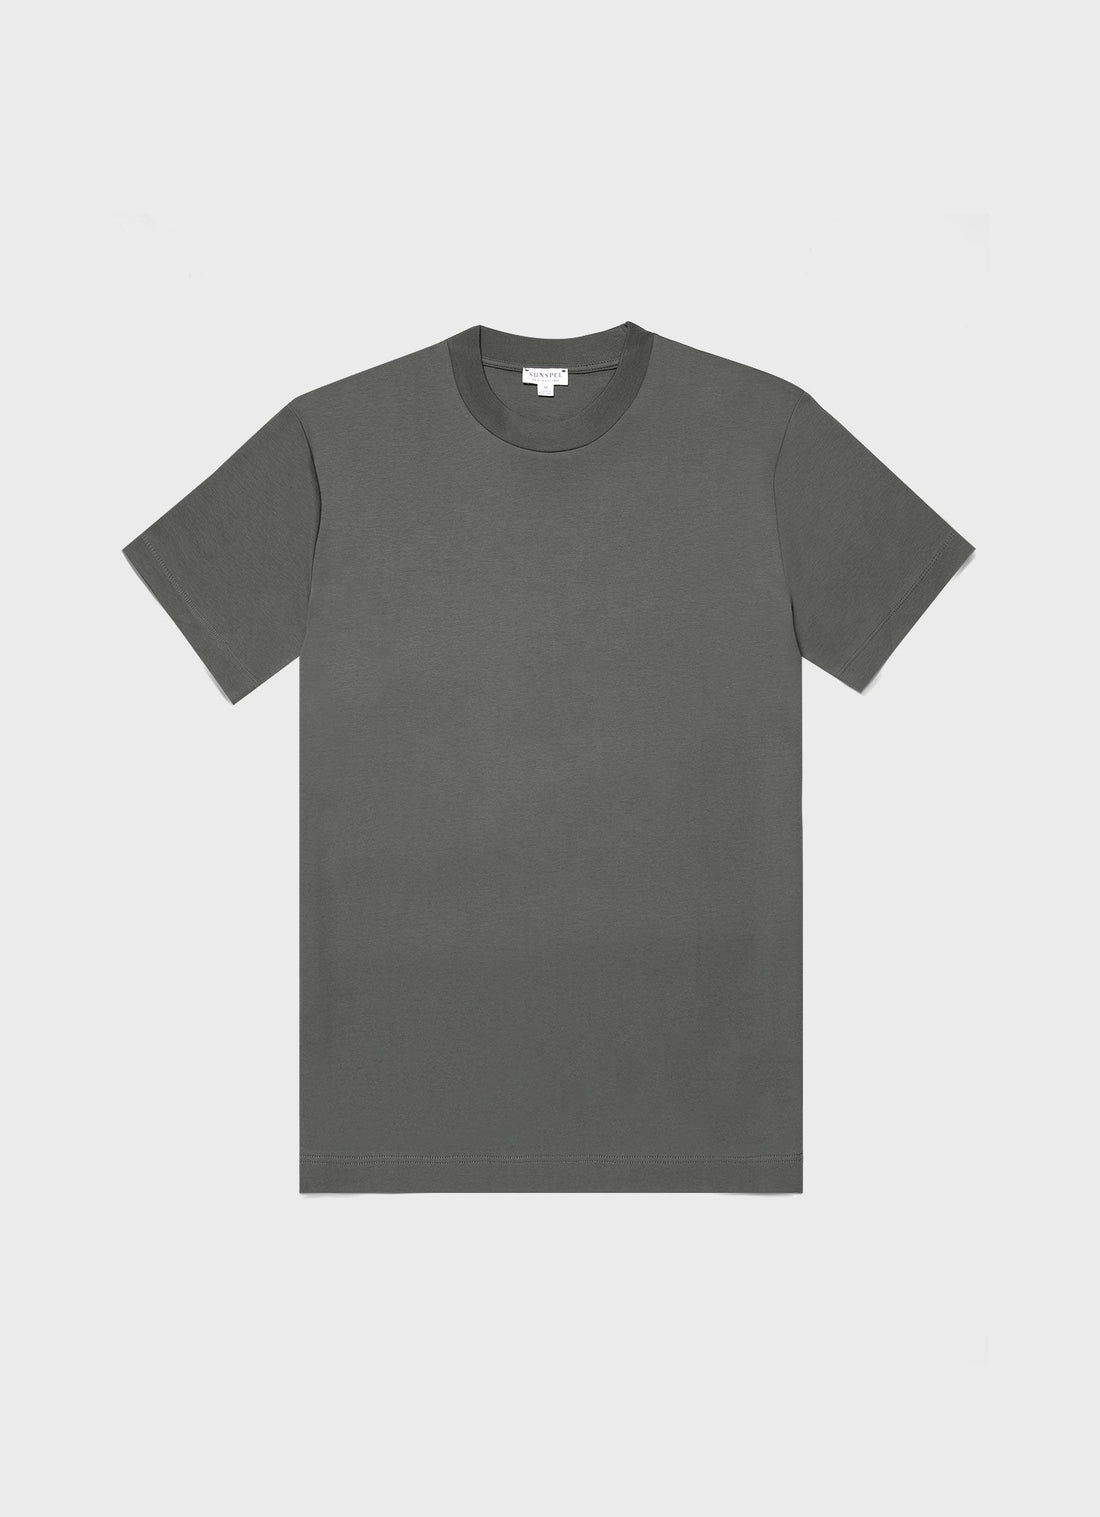 Men's Relaxed Fit Heavyweight T-shirt in Drill Green